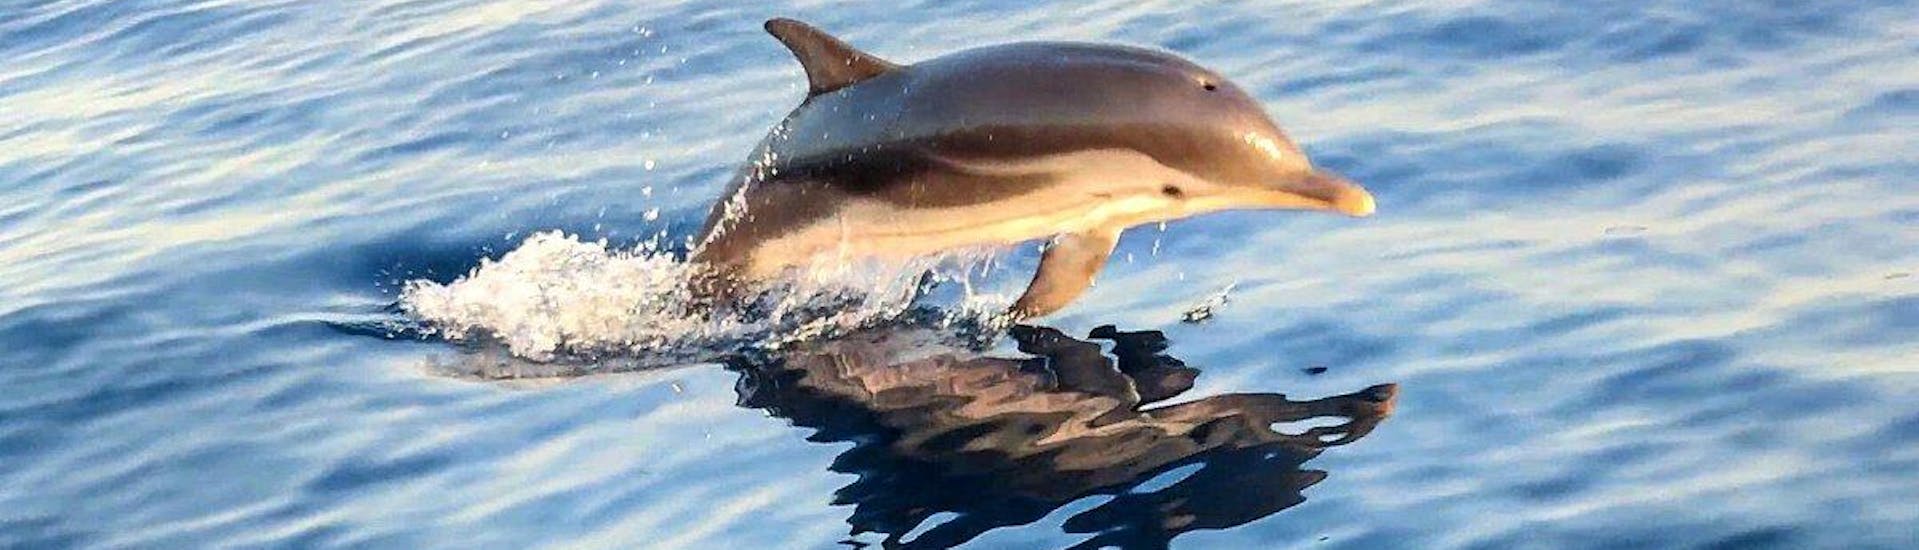 A dolphin jumping out of the water, possible to see it during a trip with Escursioni Poseidon.